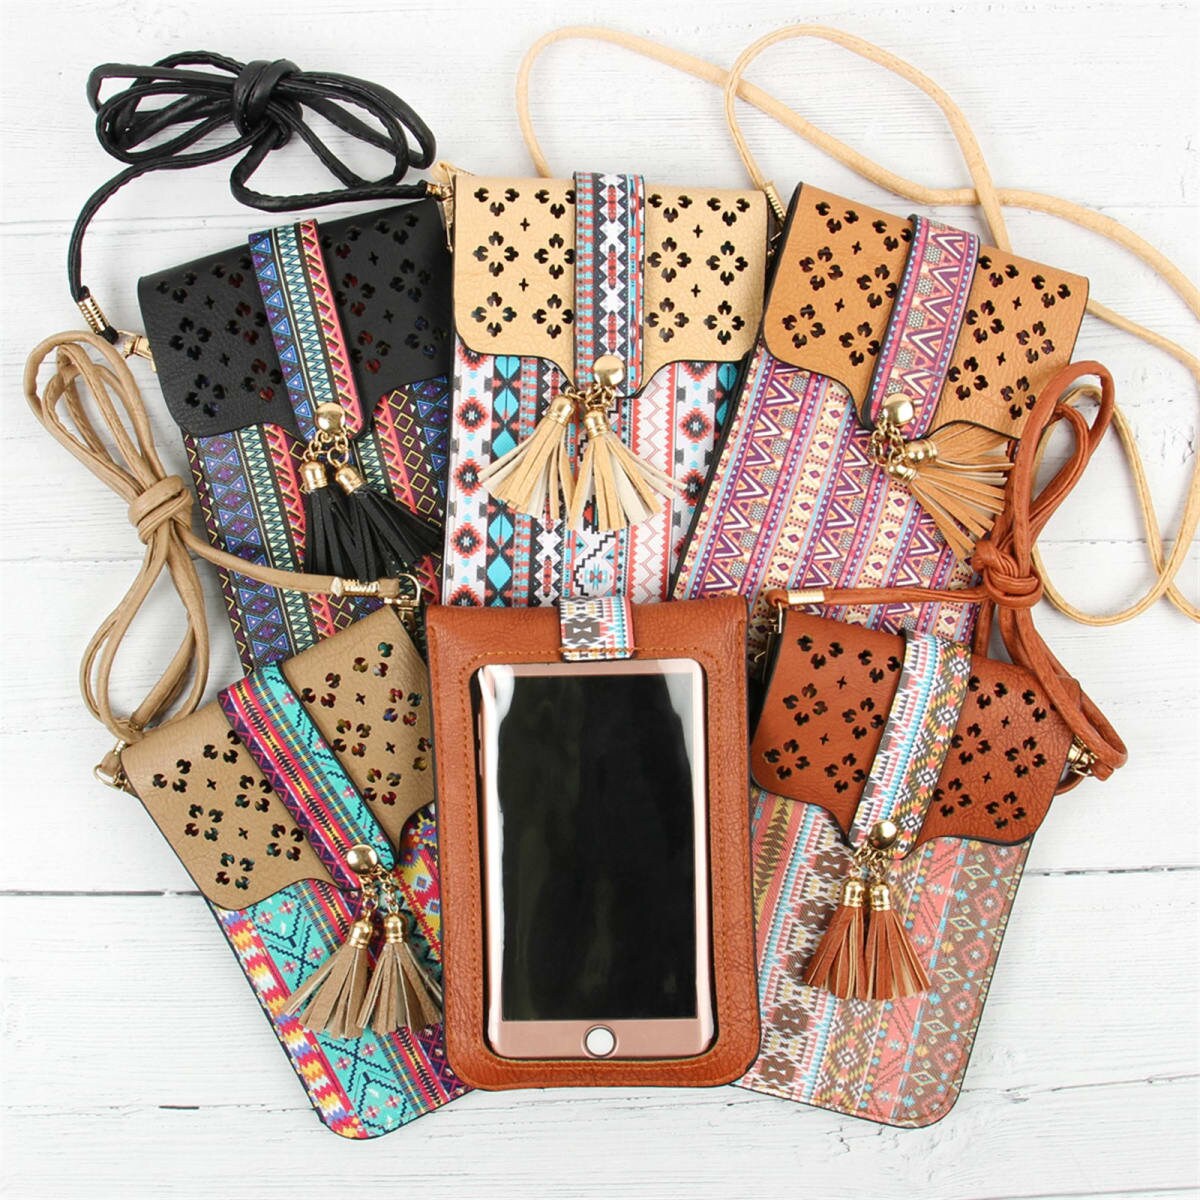 Luxtrada Cell Phone Bag, PU Leather Cell Phone Purse, Small Crossbody Bag  Cell Phone Pouch Shoulder Bag with Touch Screen Window and Removable Strap